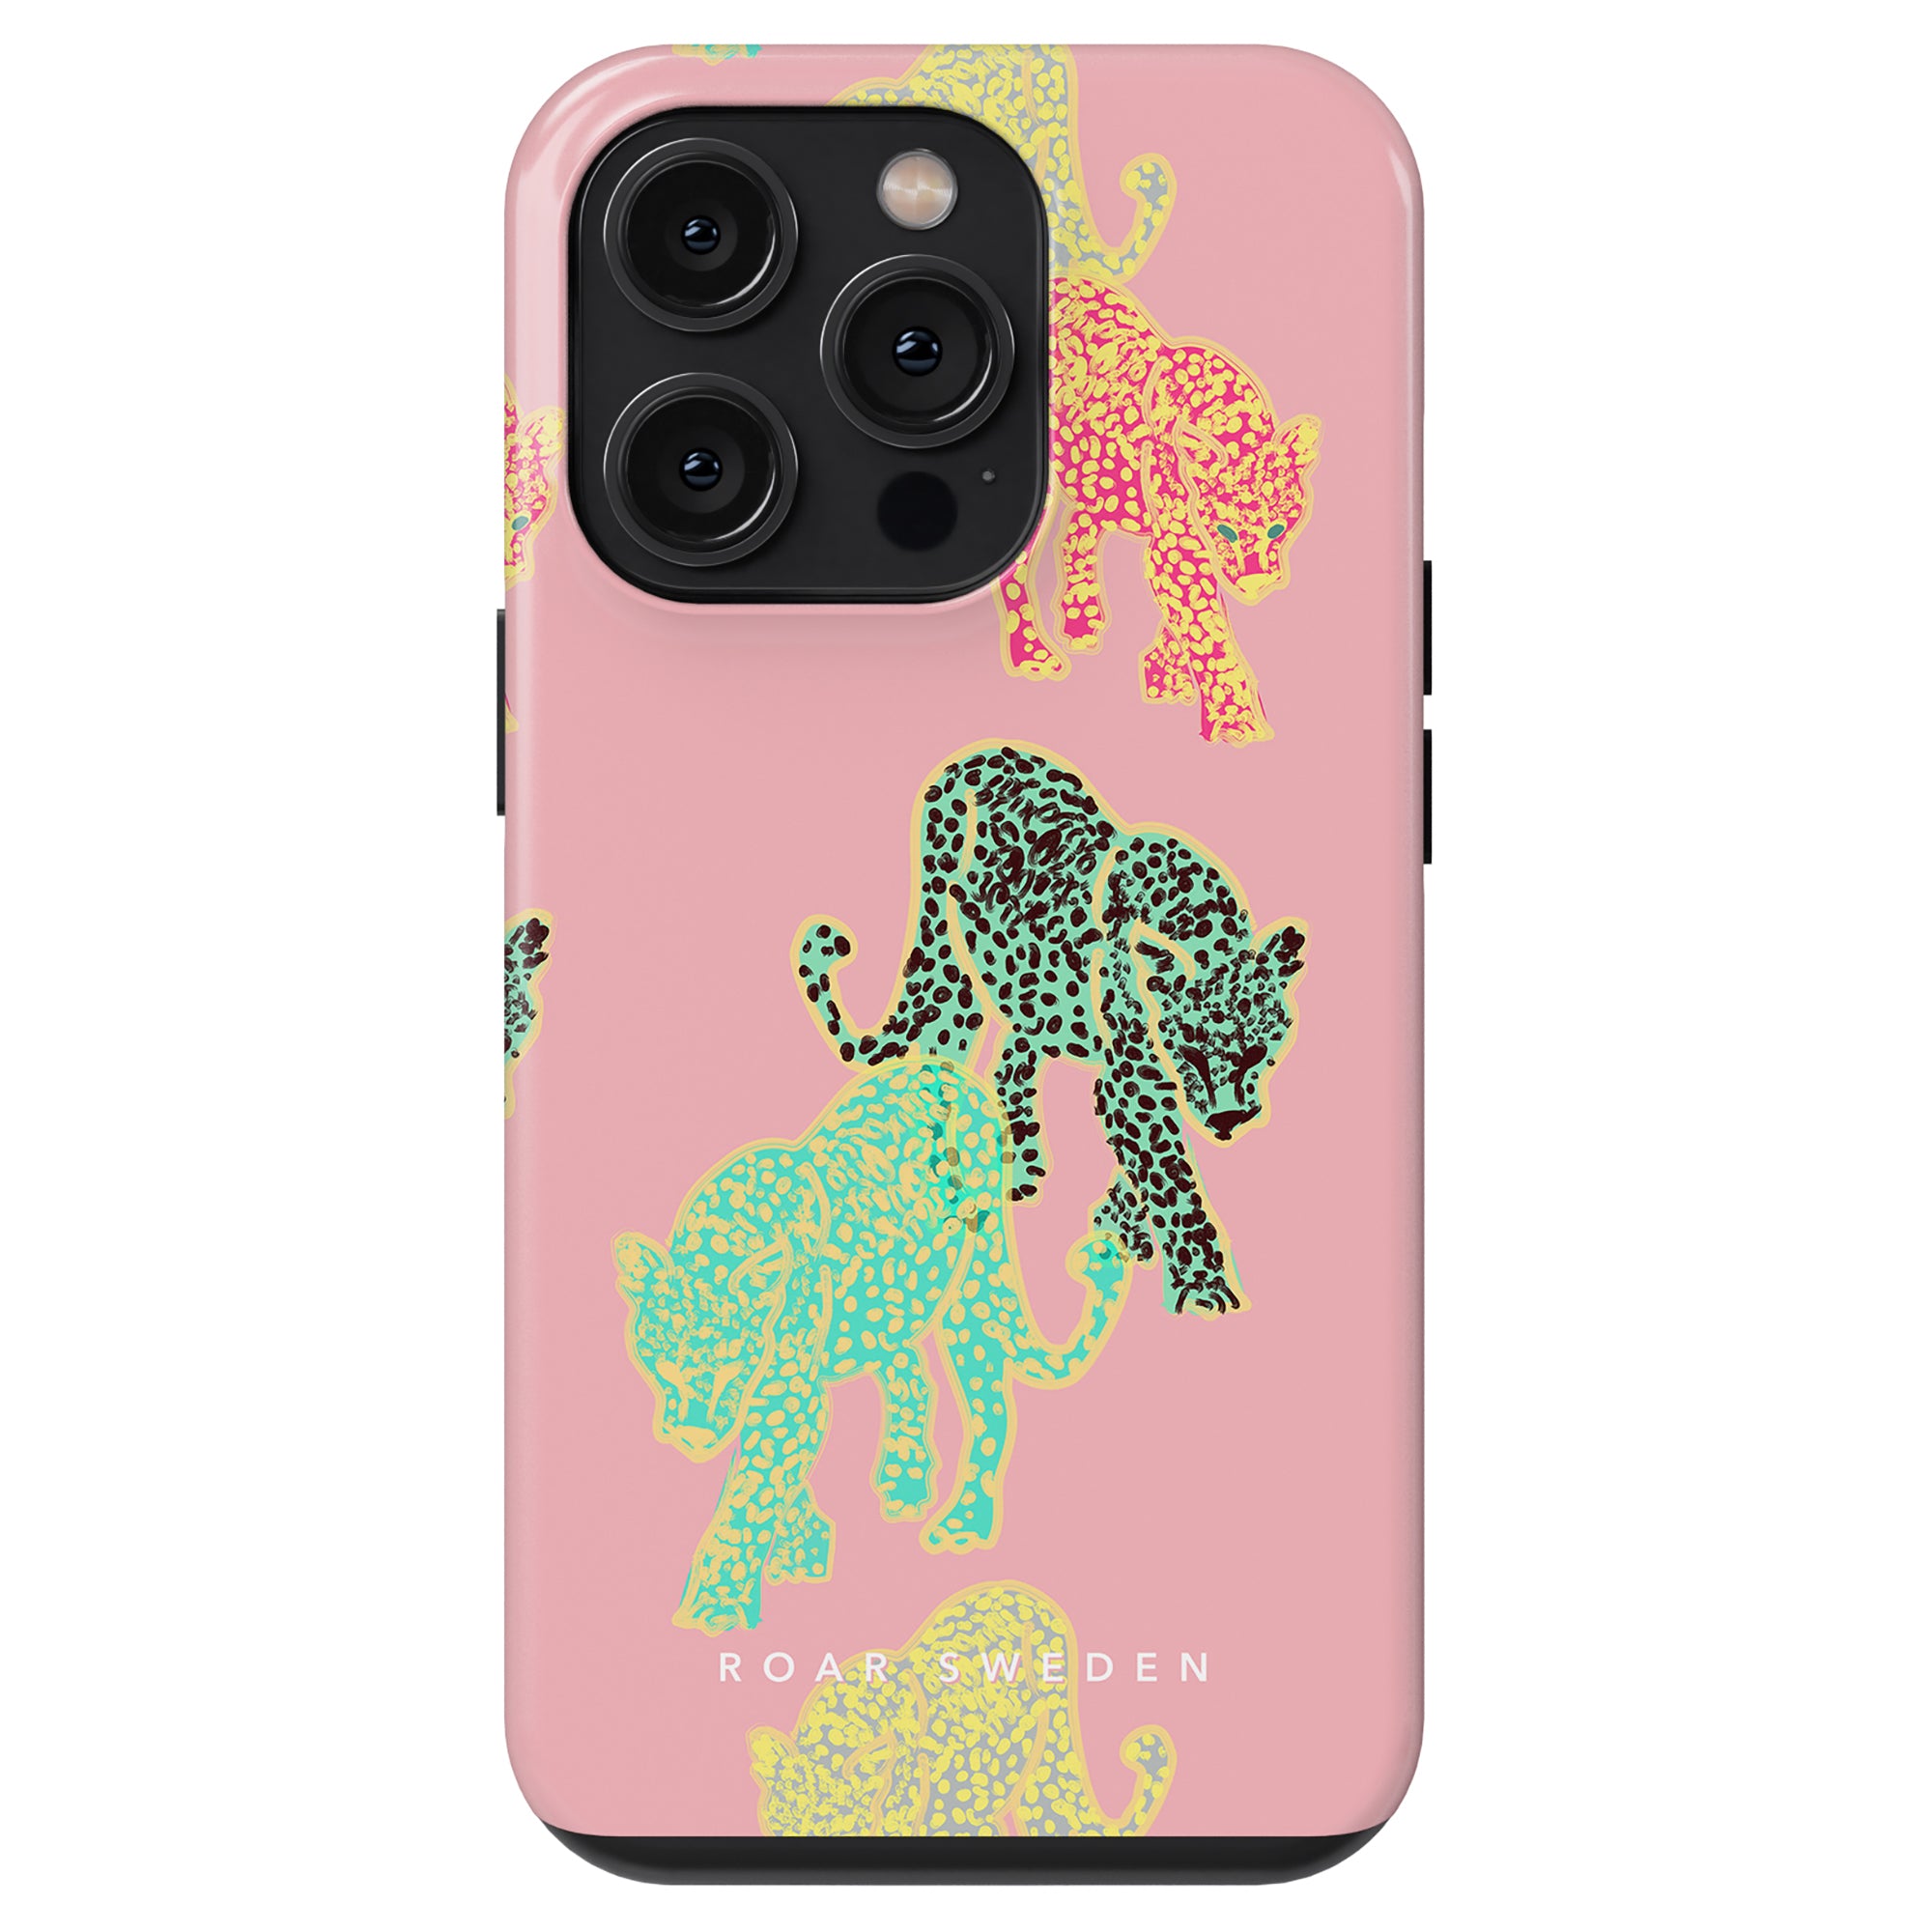 A pink smartphone case featuring a design of yellow and green elephants, labeled "Meow - Tough Case," with cutouts for camera lenses.